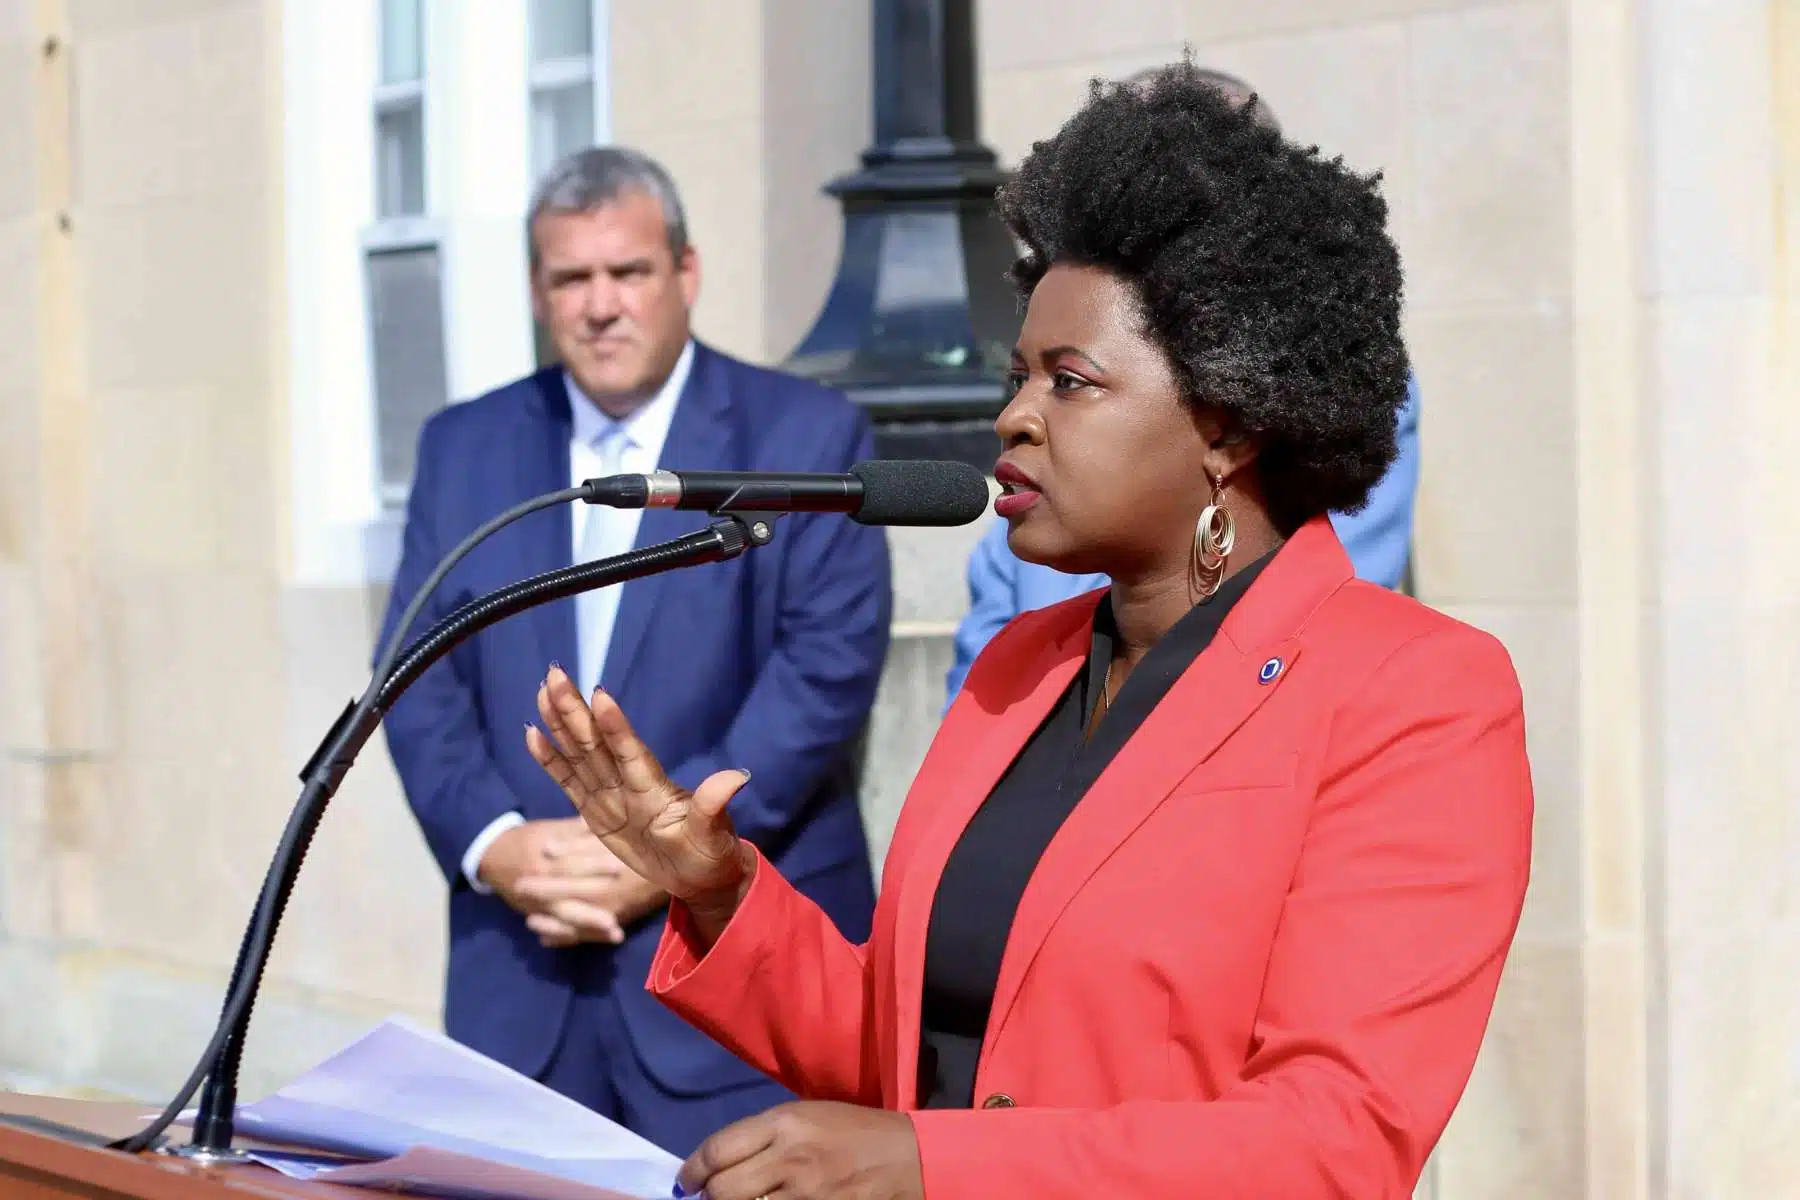 Haitian-American elected officials implore Biden Administration to help save Haiti